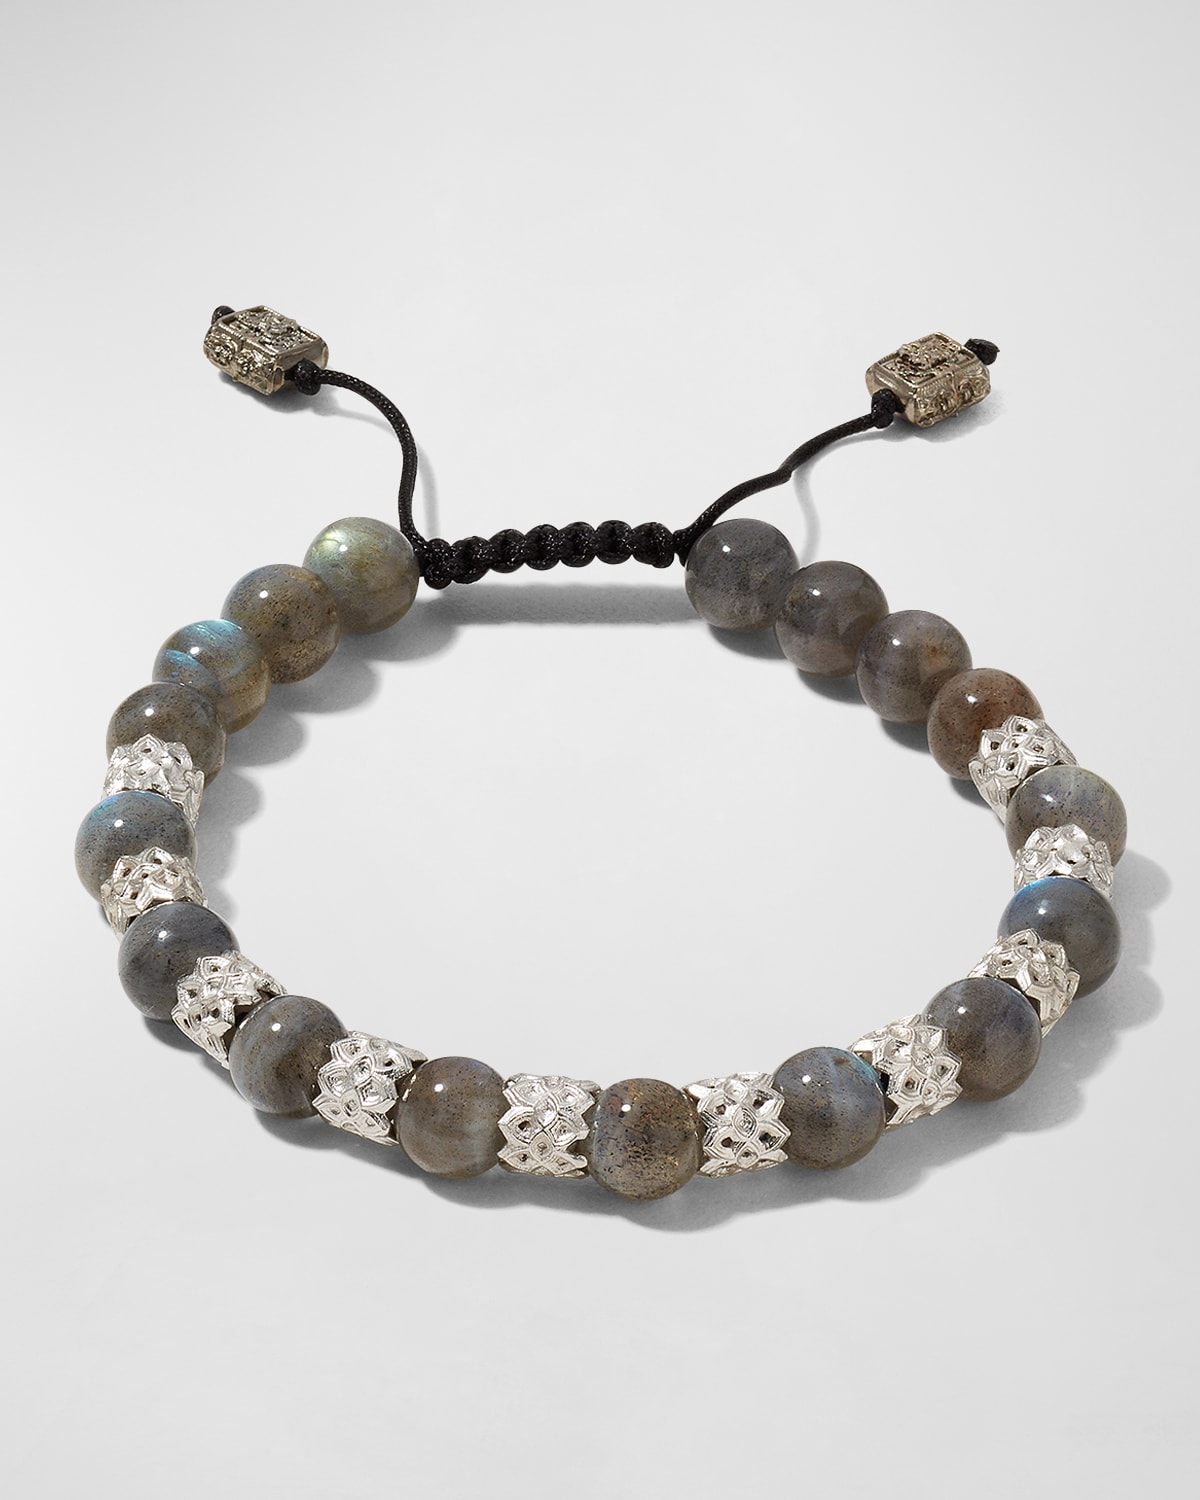 Men's Sterling Silver & Pyrite Gemstone Beaded Necklace